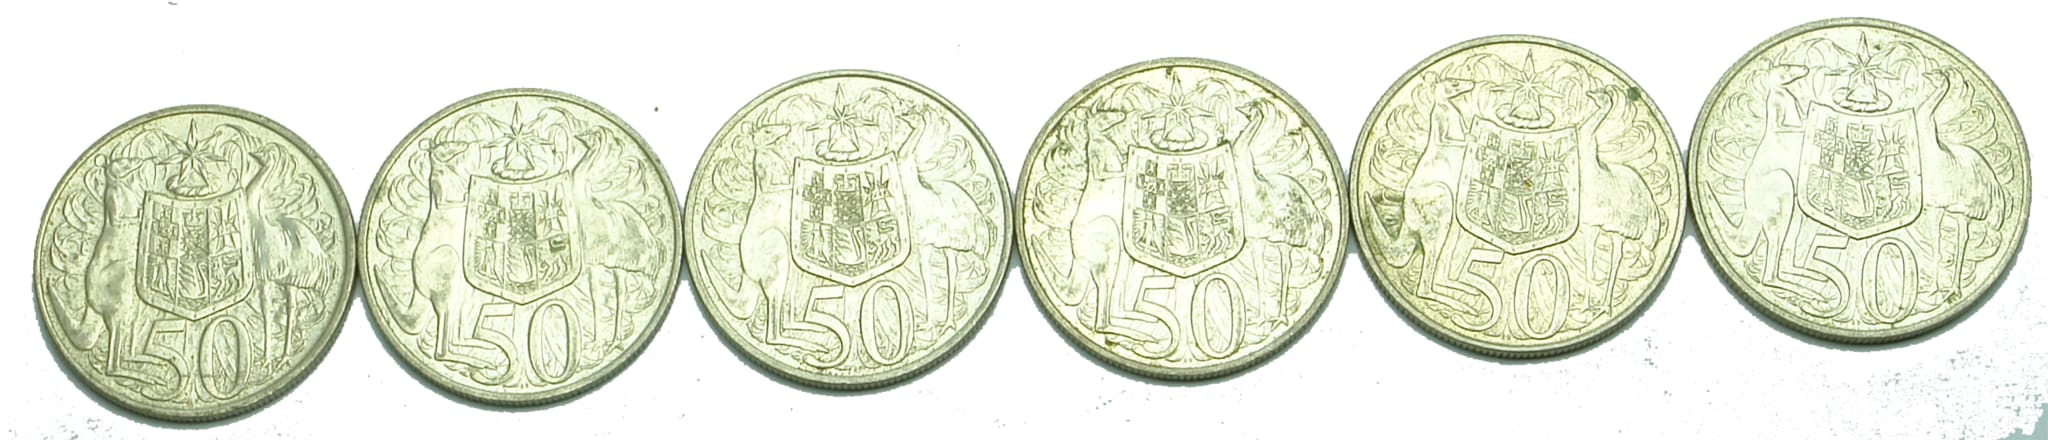 1966 Fifty Cent Pieces